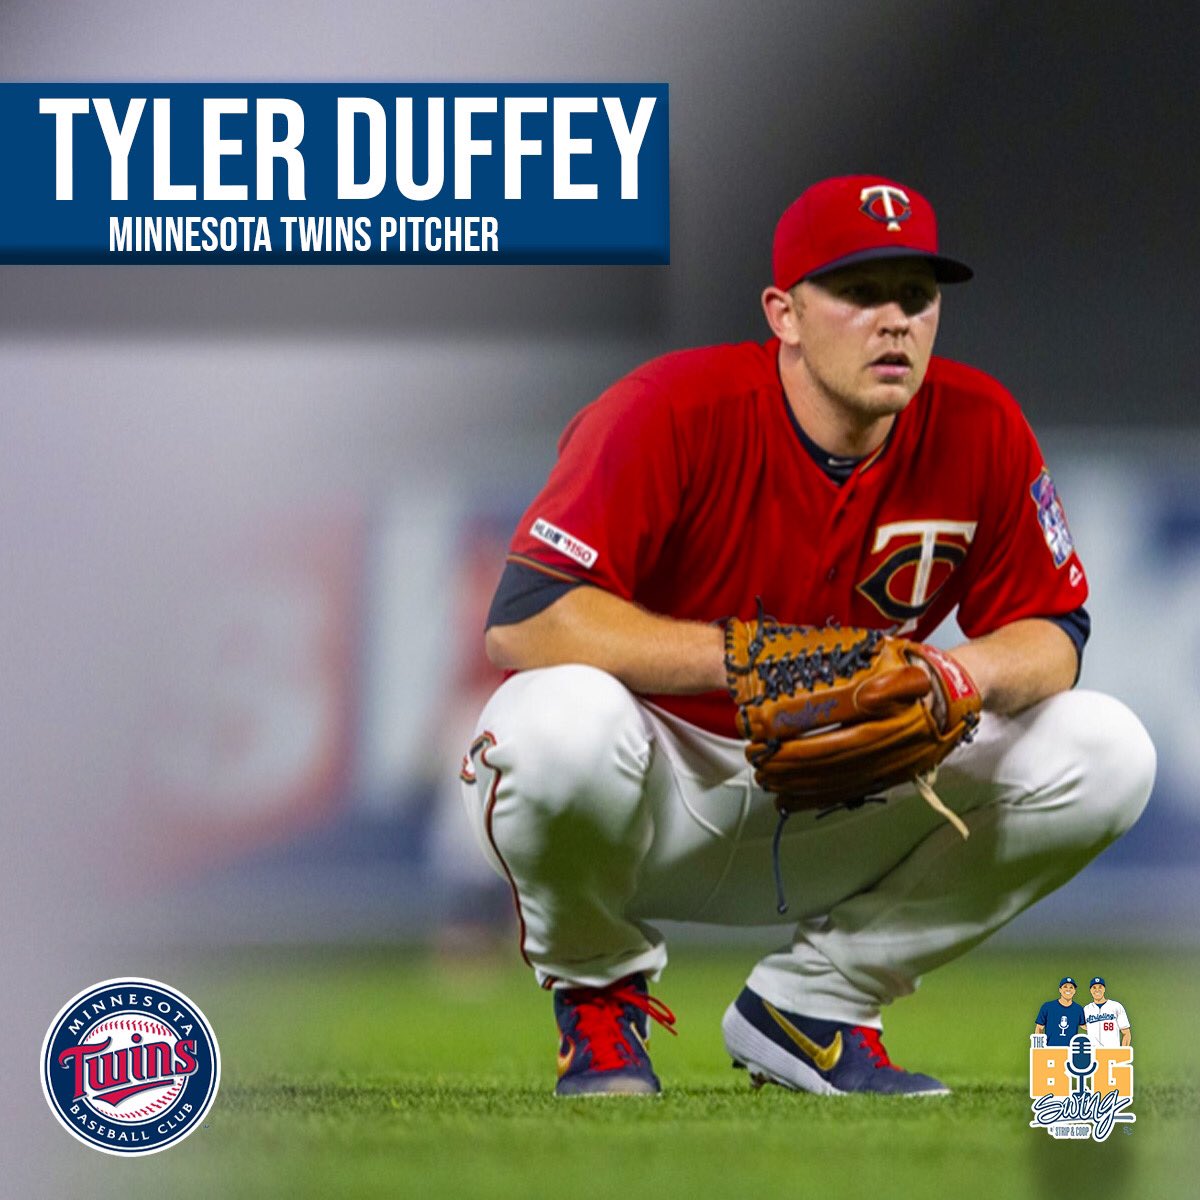 Due to extreme weather conditions, we were unable to record a new episode this week. So, we are re-releasing the interview with Minnesota Twins Pitcher, Tyler Duffey. Duffey dives into his baseball journey as well as his entertaining baseball stories when he was in high school. https://t.co/Dm4i0IlpTG